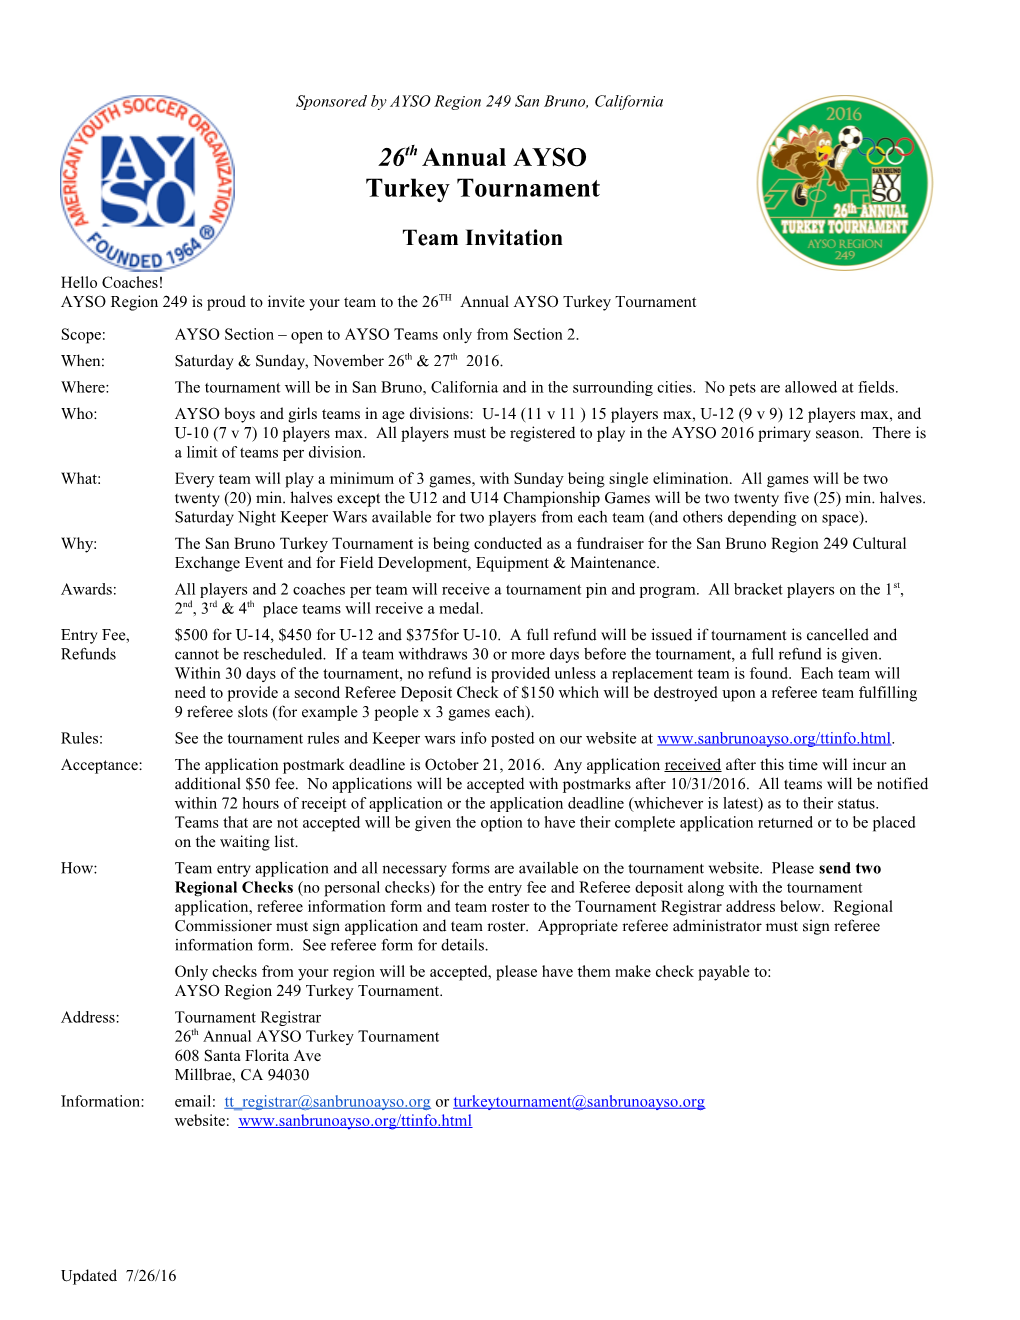 AYSO Region 249 Is Proud to Invite Your Team to the 26TH Annual AYSO Turkey Tournament